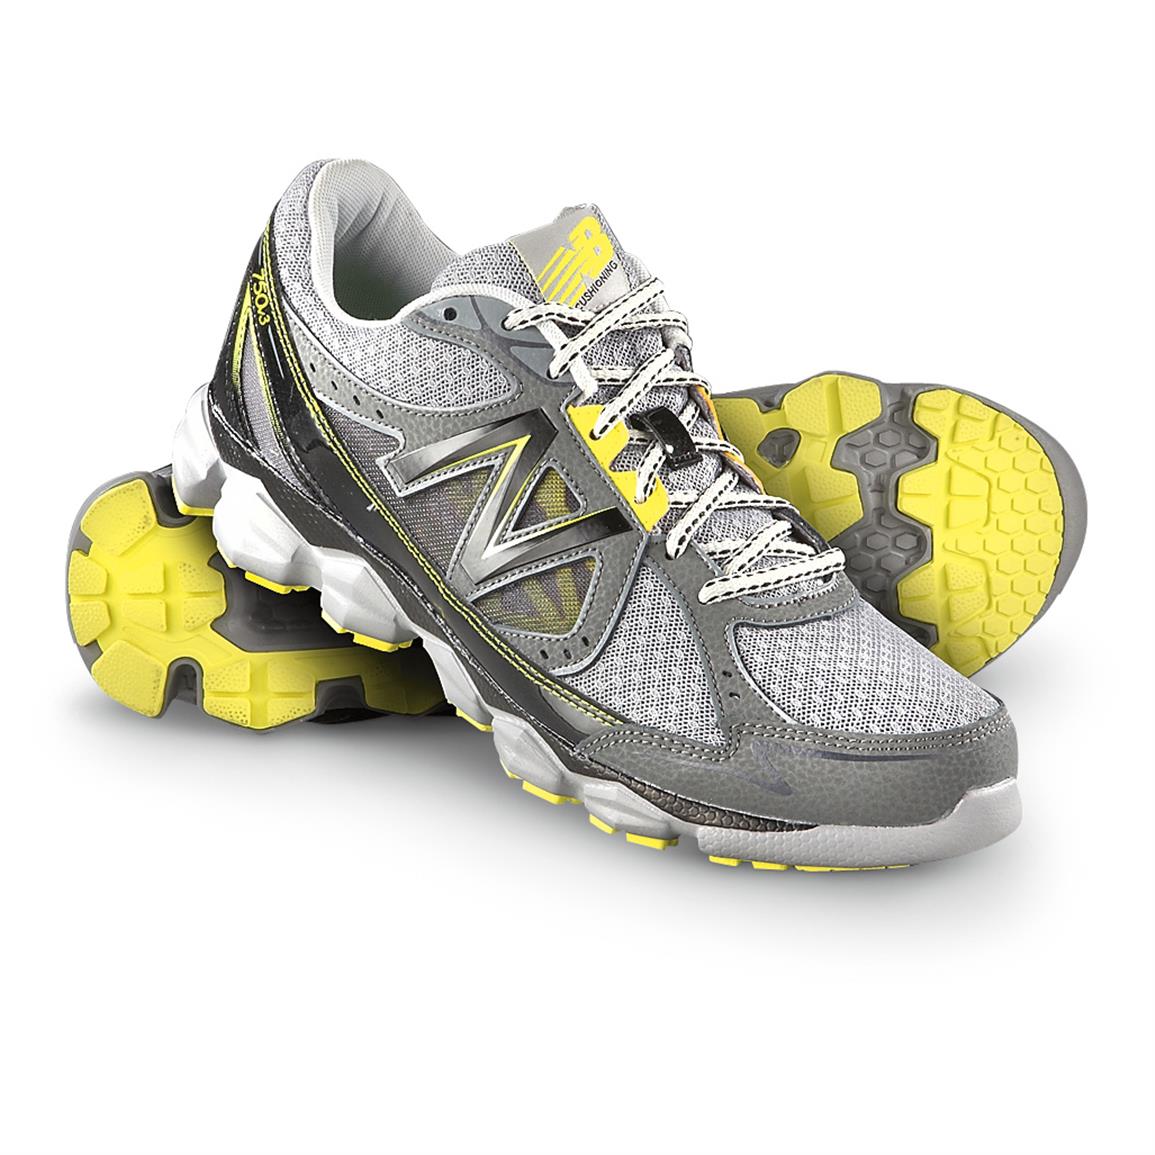 Men's New Balance 750V3 Trail Runner Shoes, Gray / Lime - 583455, Running  Shoes \u0026 Sneakers at Sportsman's Guide